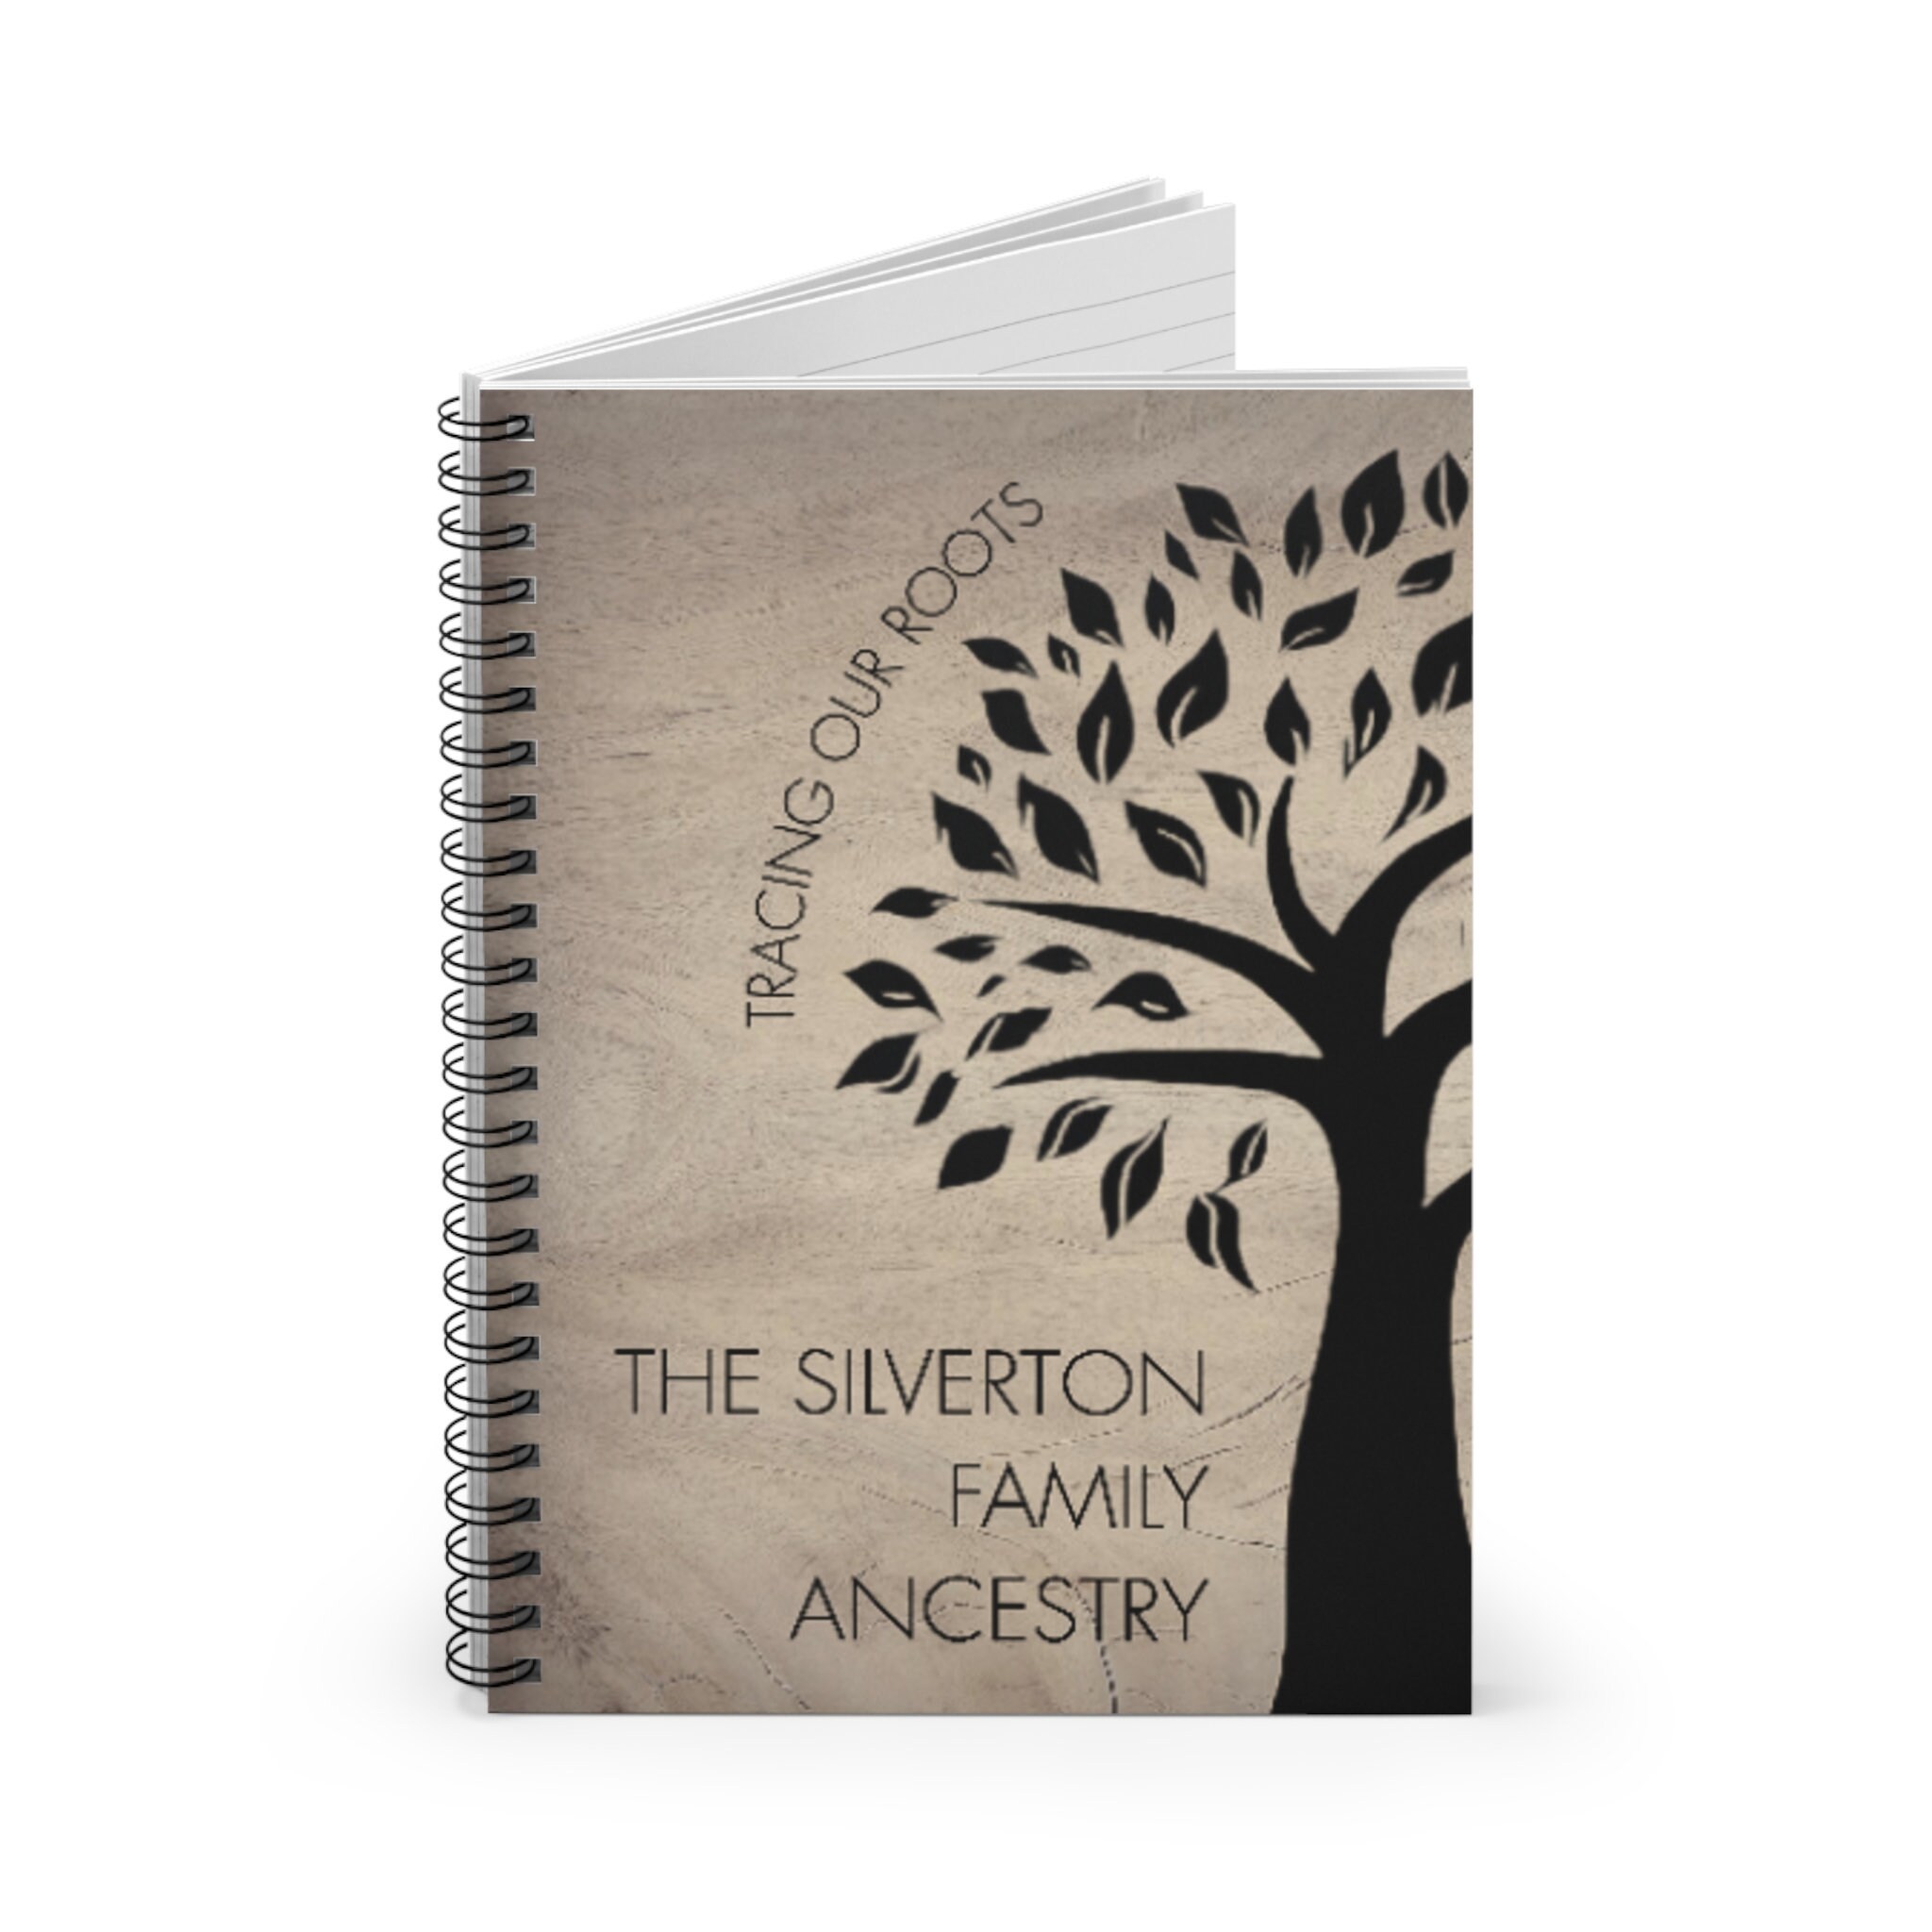 Family Tree Book 235pg Paperback Genealogy Index Notebook for 12